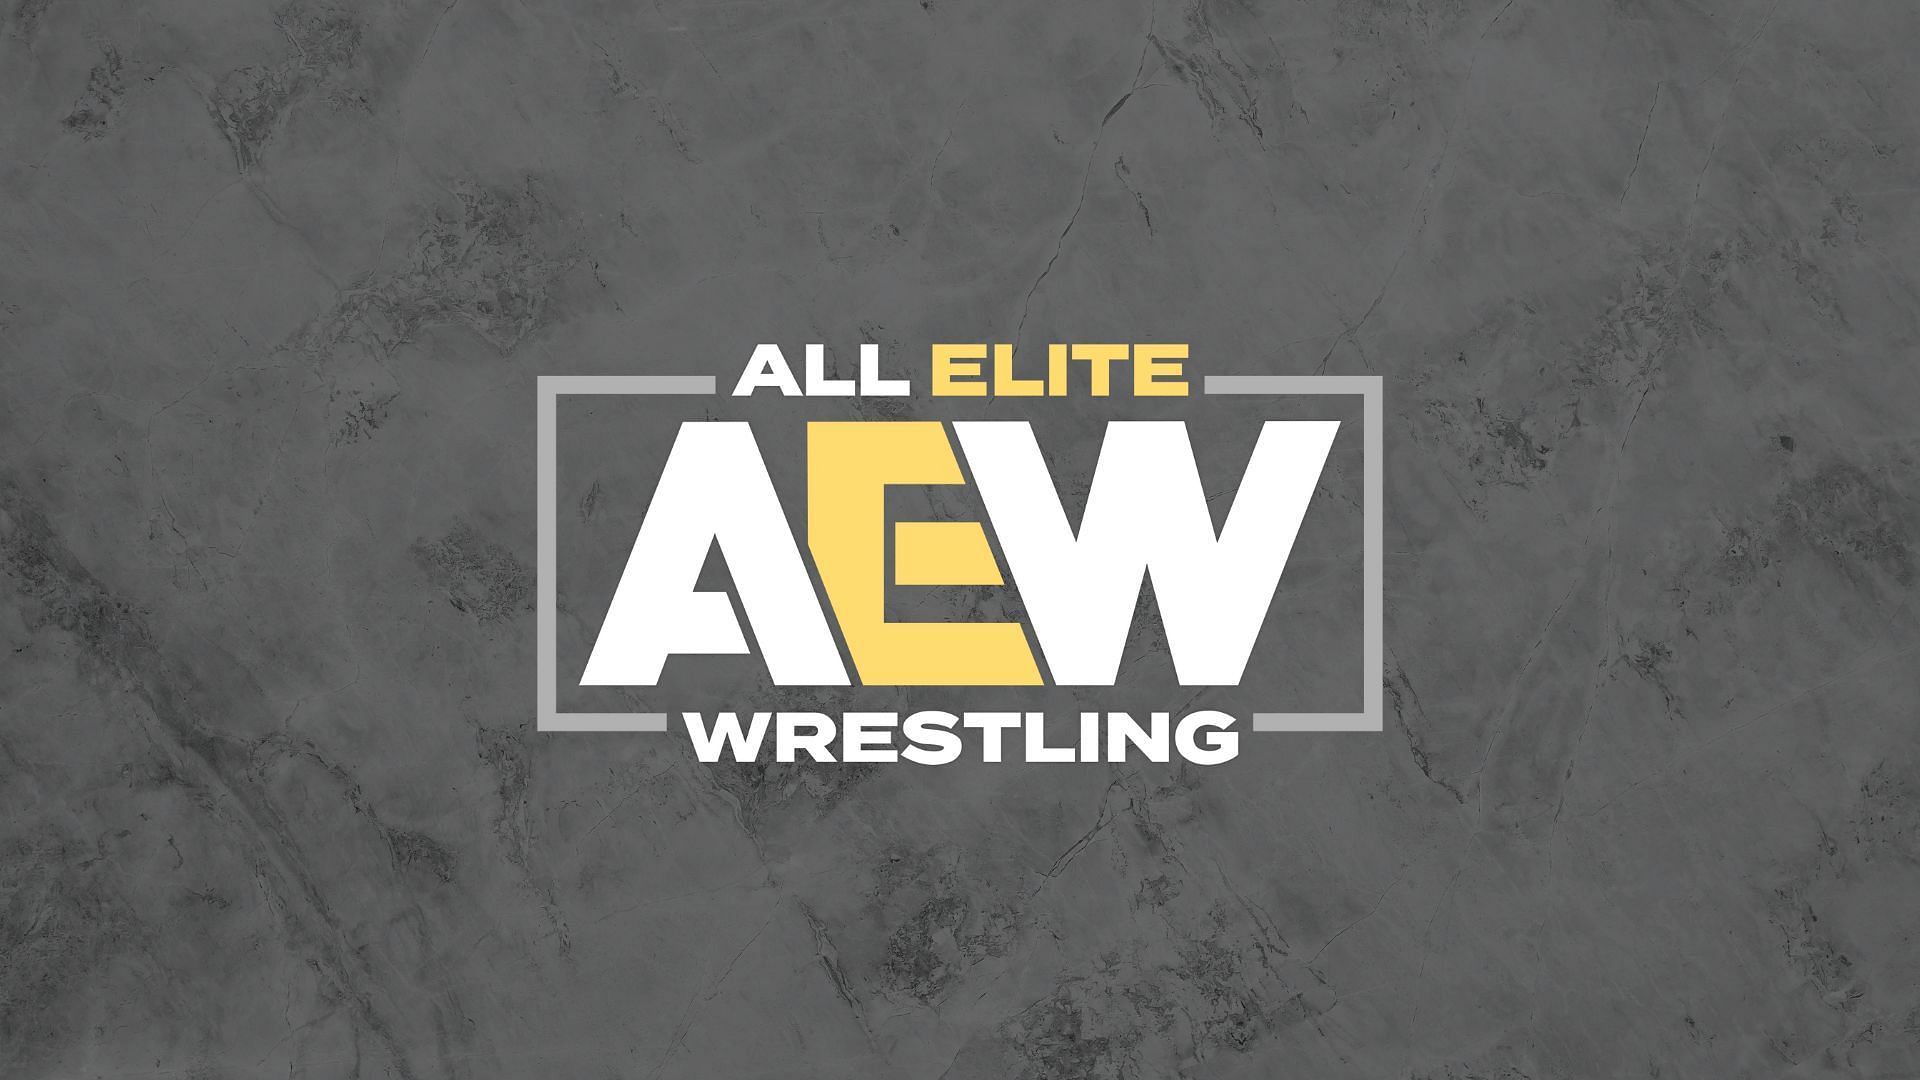 AEW star teased a career path other than professional wrestling.